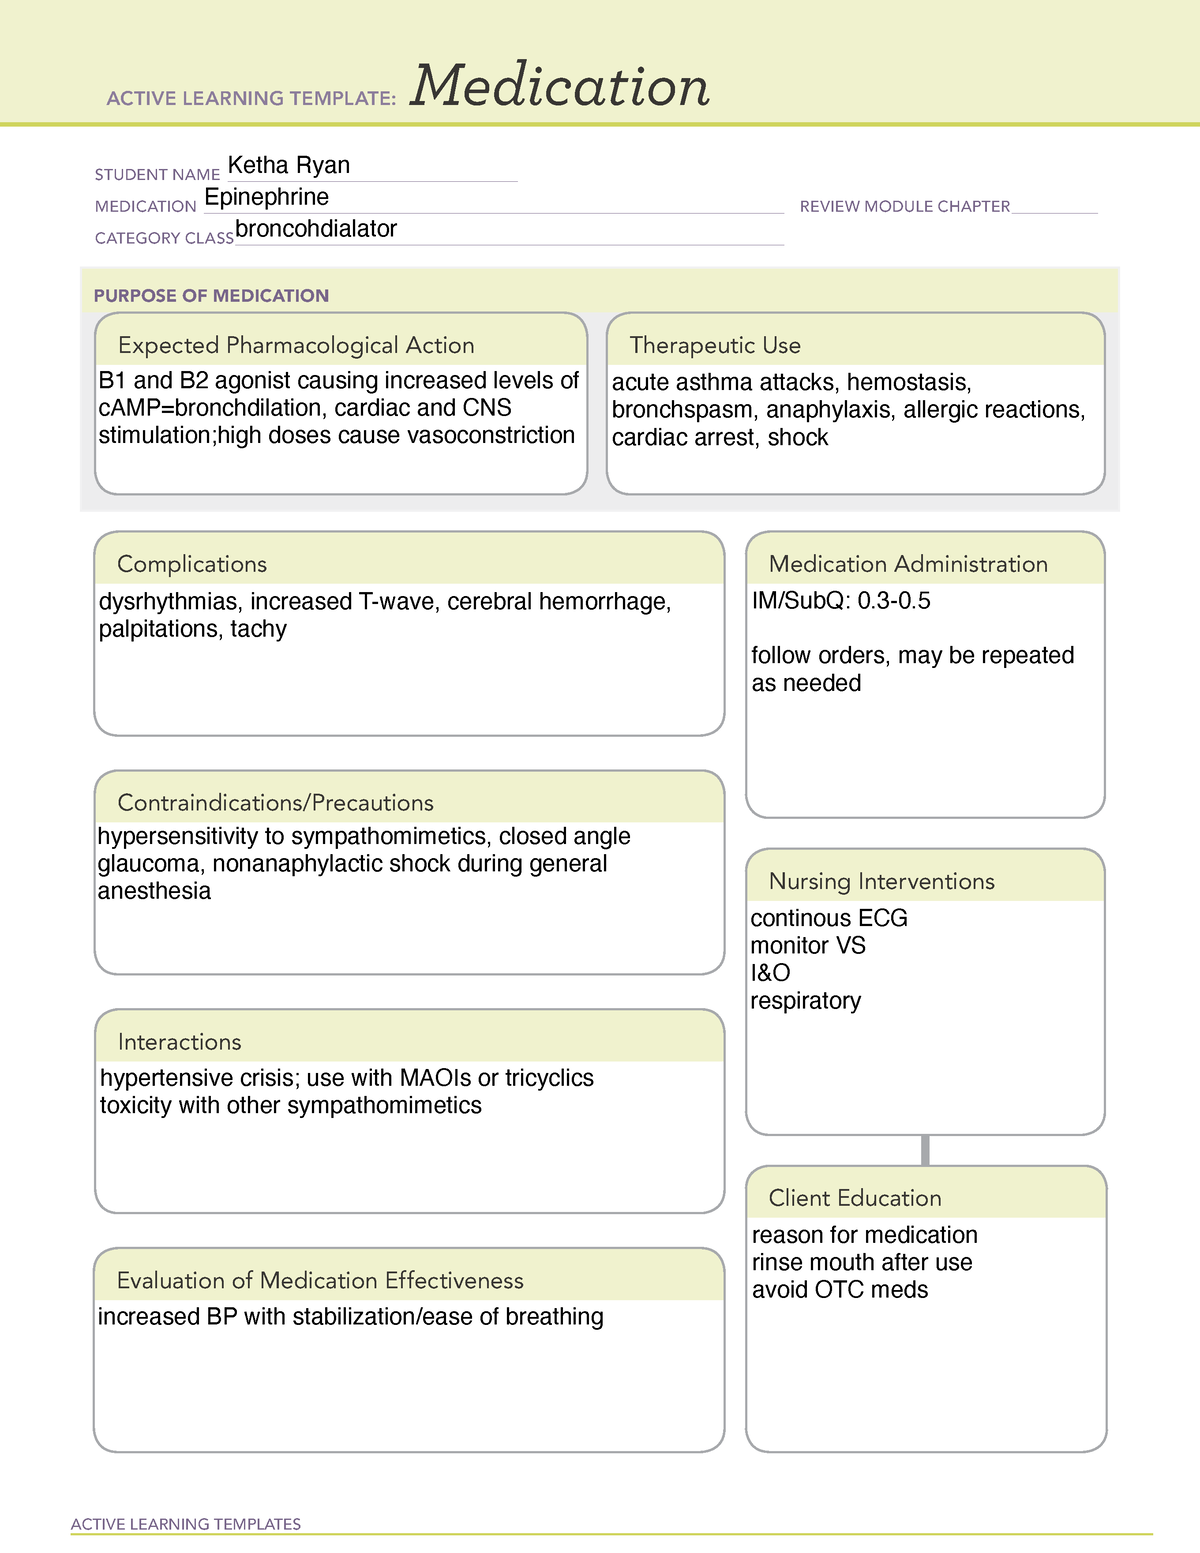 ATI Epinephrine ATI Med Template ACTIVE LEARNING TEMPLATES